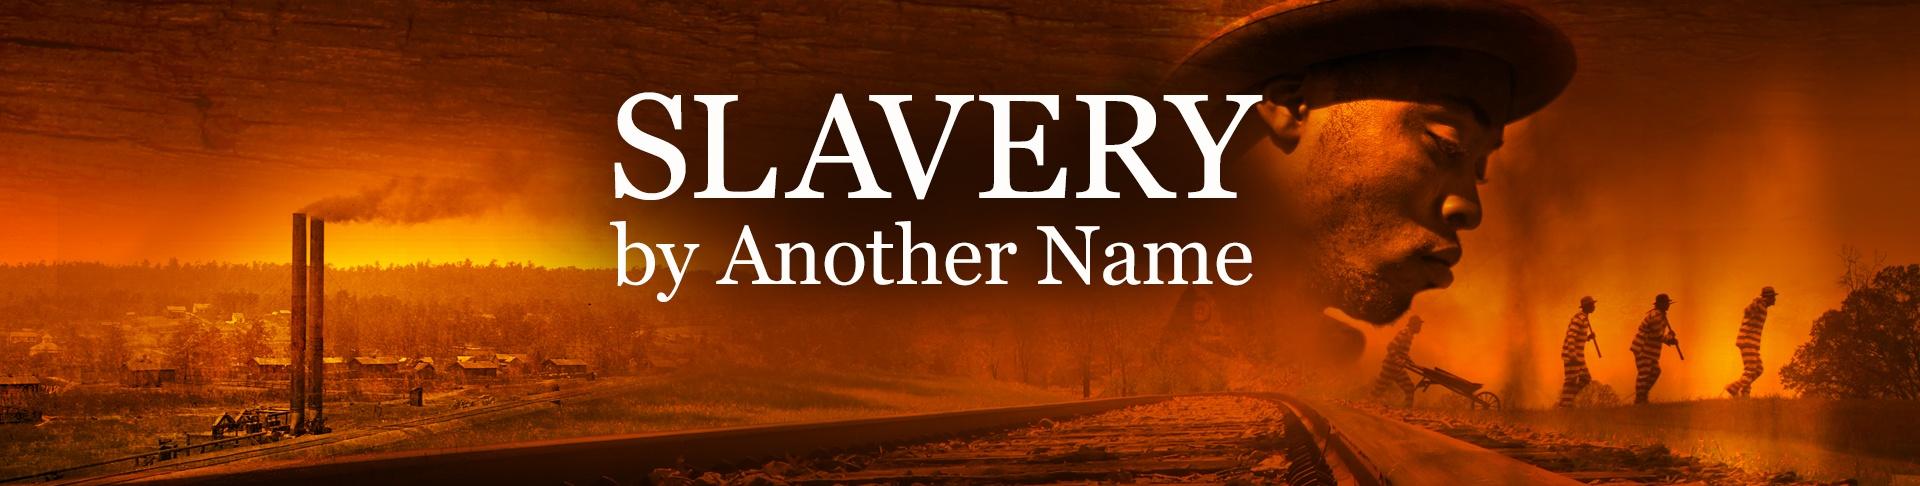 slavery by another name author